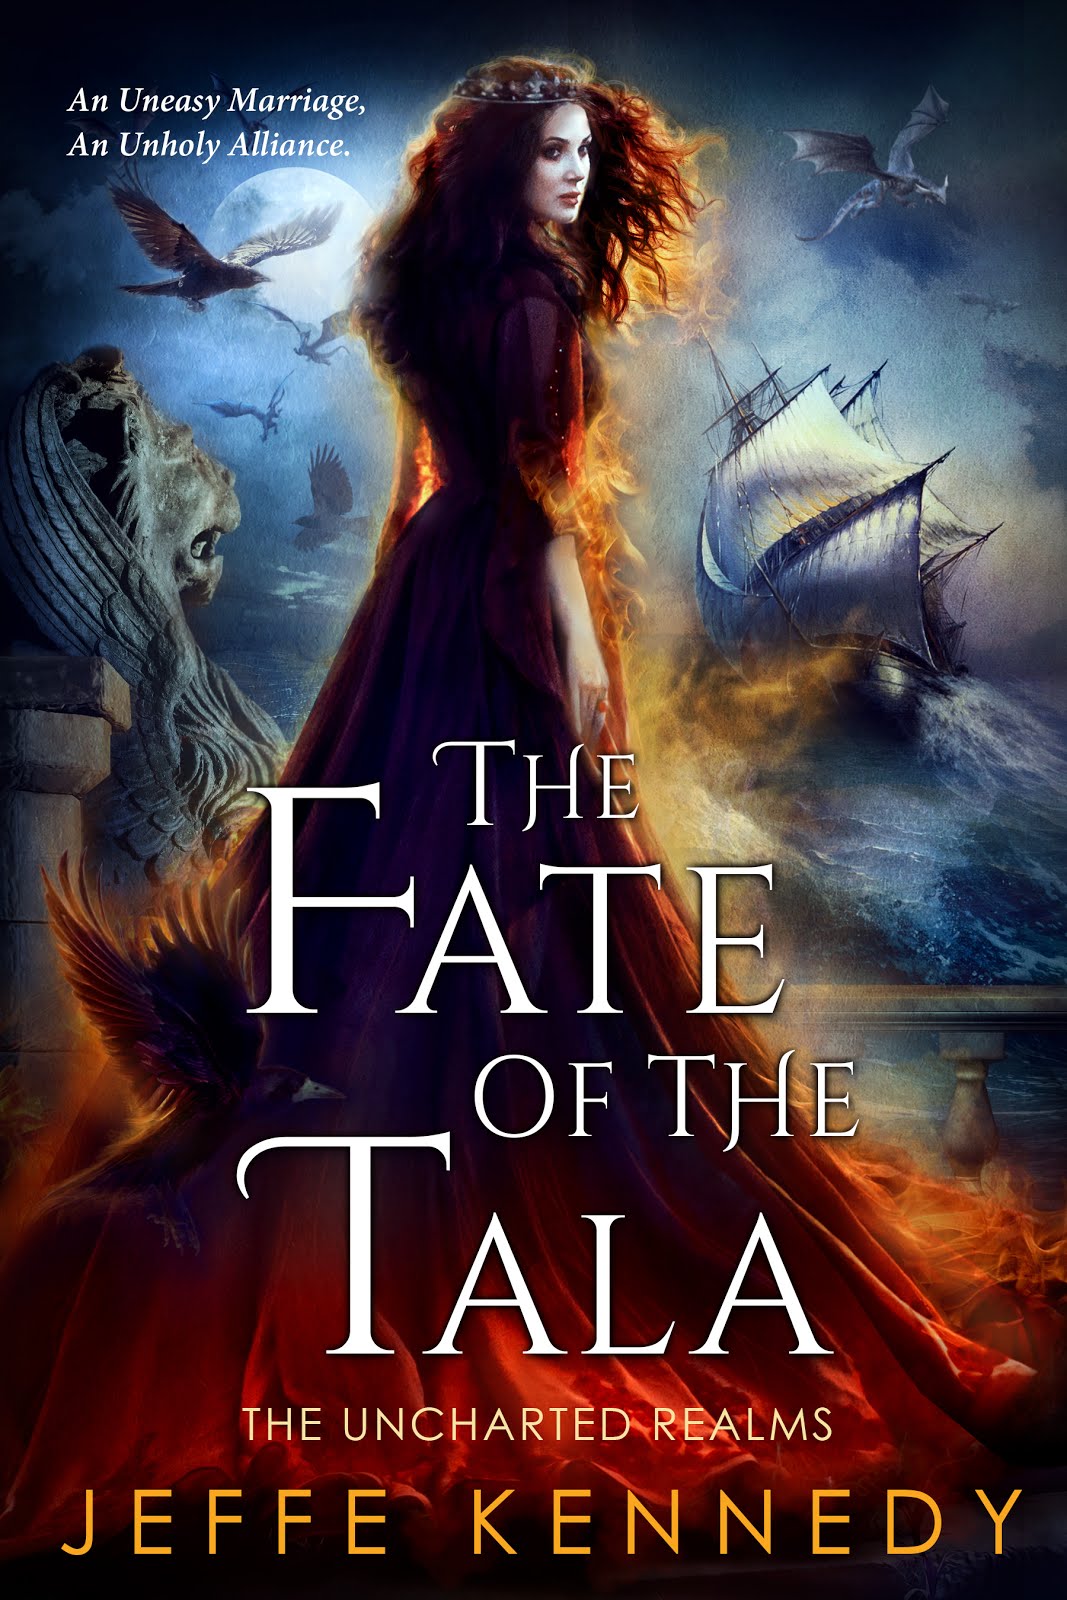 The Fate of the Tala (Uncharted Realms)